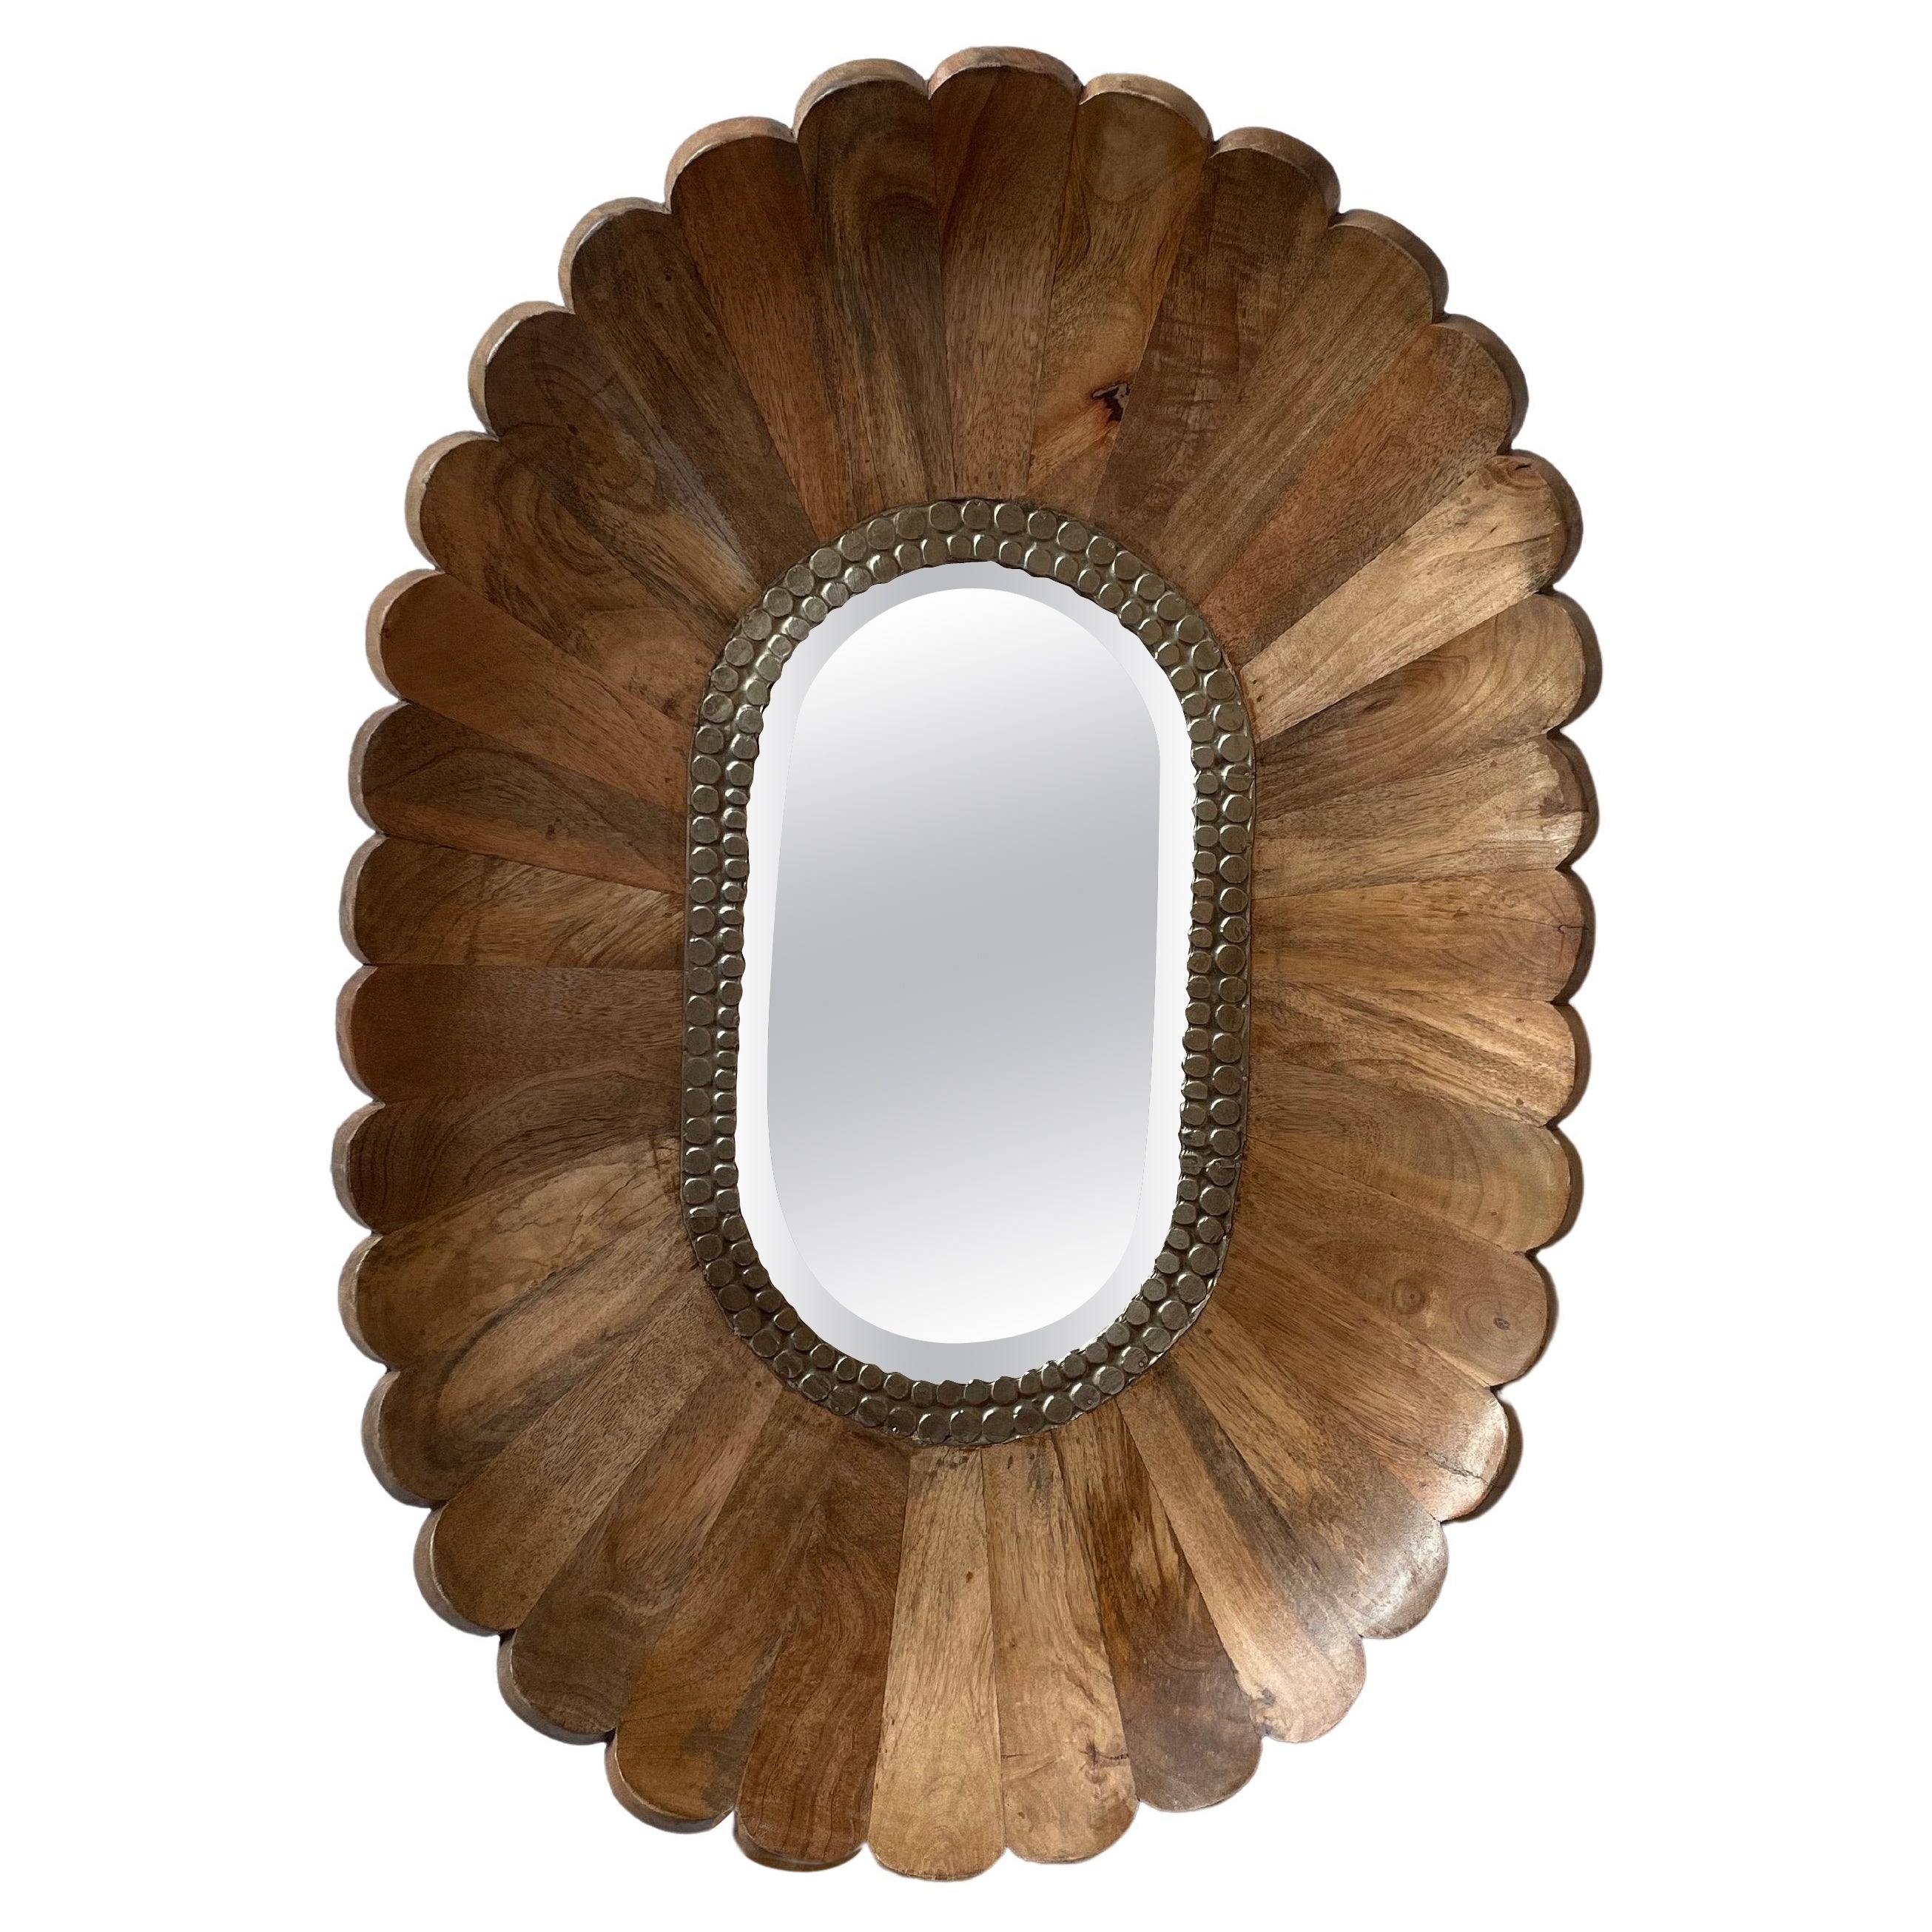 Floral Wooden Wall Mirror For Sale